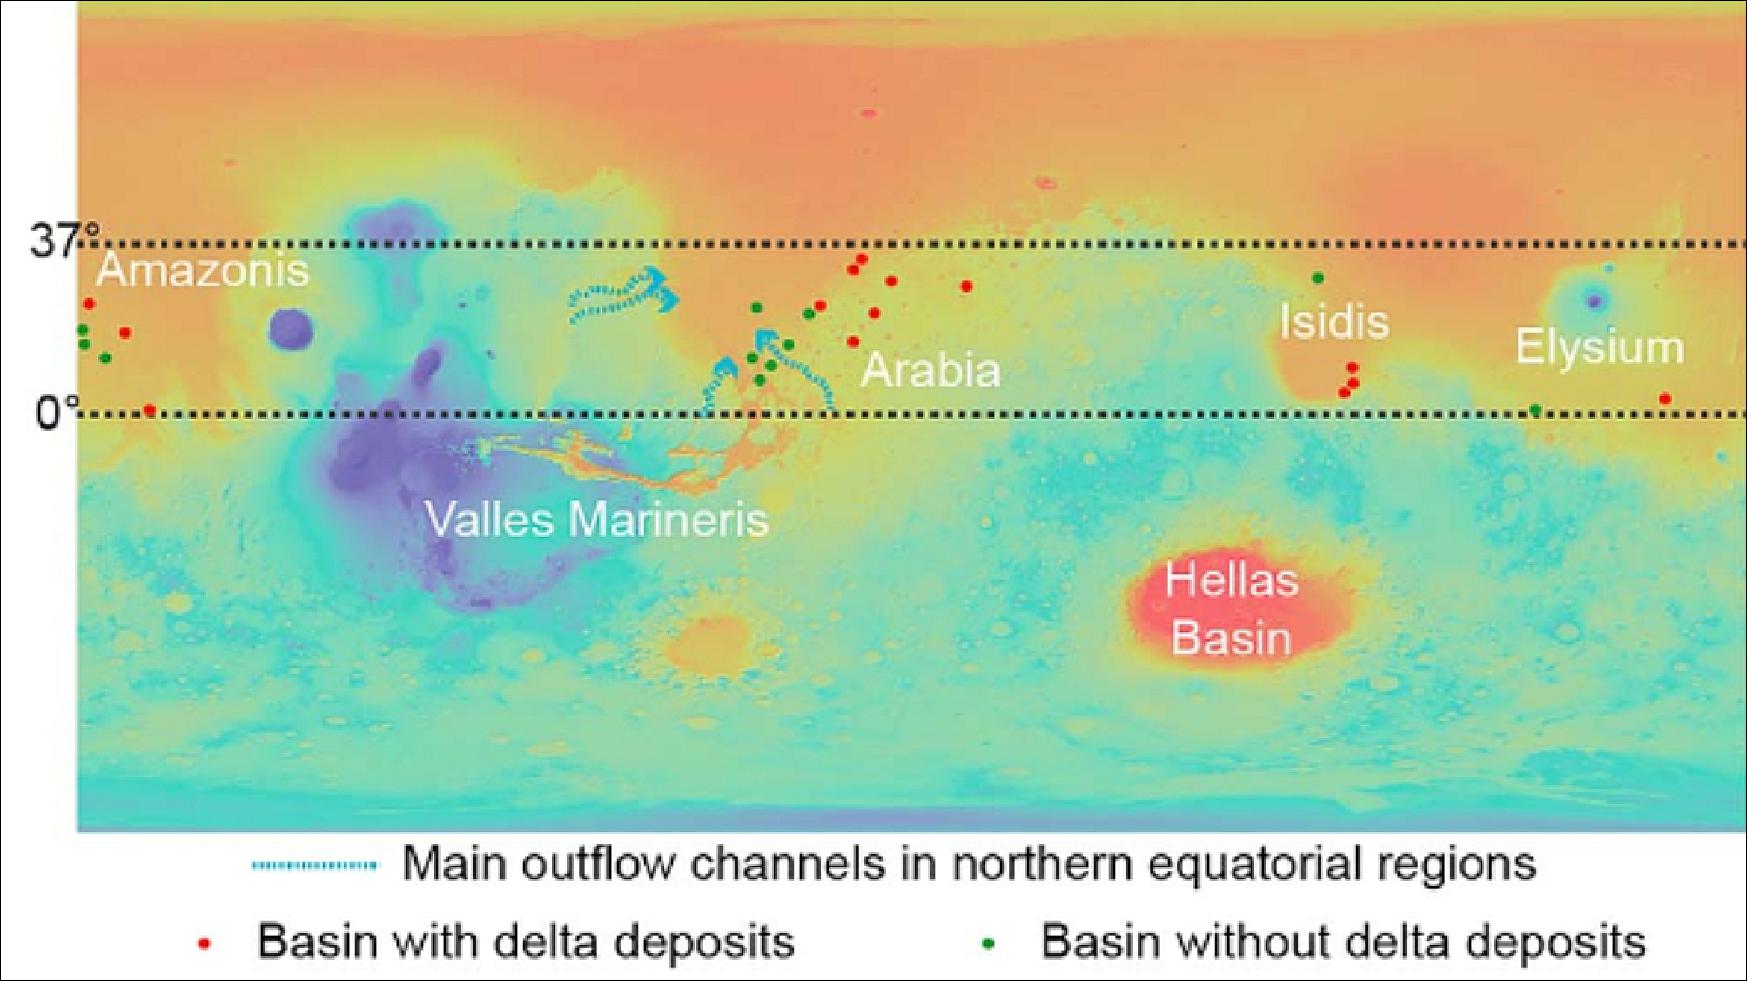 Figure 52: This image shows the distribution of a number of deep craters (marked as dots) recently explored as part of a study into groundwater on Mars. The background image is shown in colors representing topography: reds and oranges are lower elevations, and blues and greens are higher ones. The study found that the floors of the basins, which sit over 4000 m deep, show signs of past water – the first geological evidence that the Red Planet once had a system of interconnected groundwater-fed lakes that spanned the entire planet [image credit: Topography: NASA/MGS/MOLA; Crater distribution: F. Salese et al (2019)]